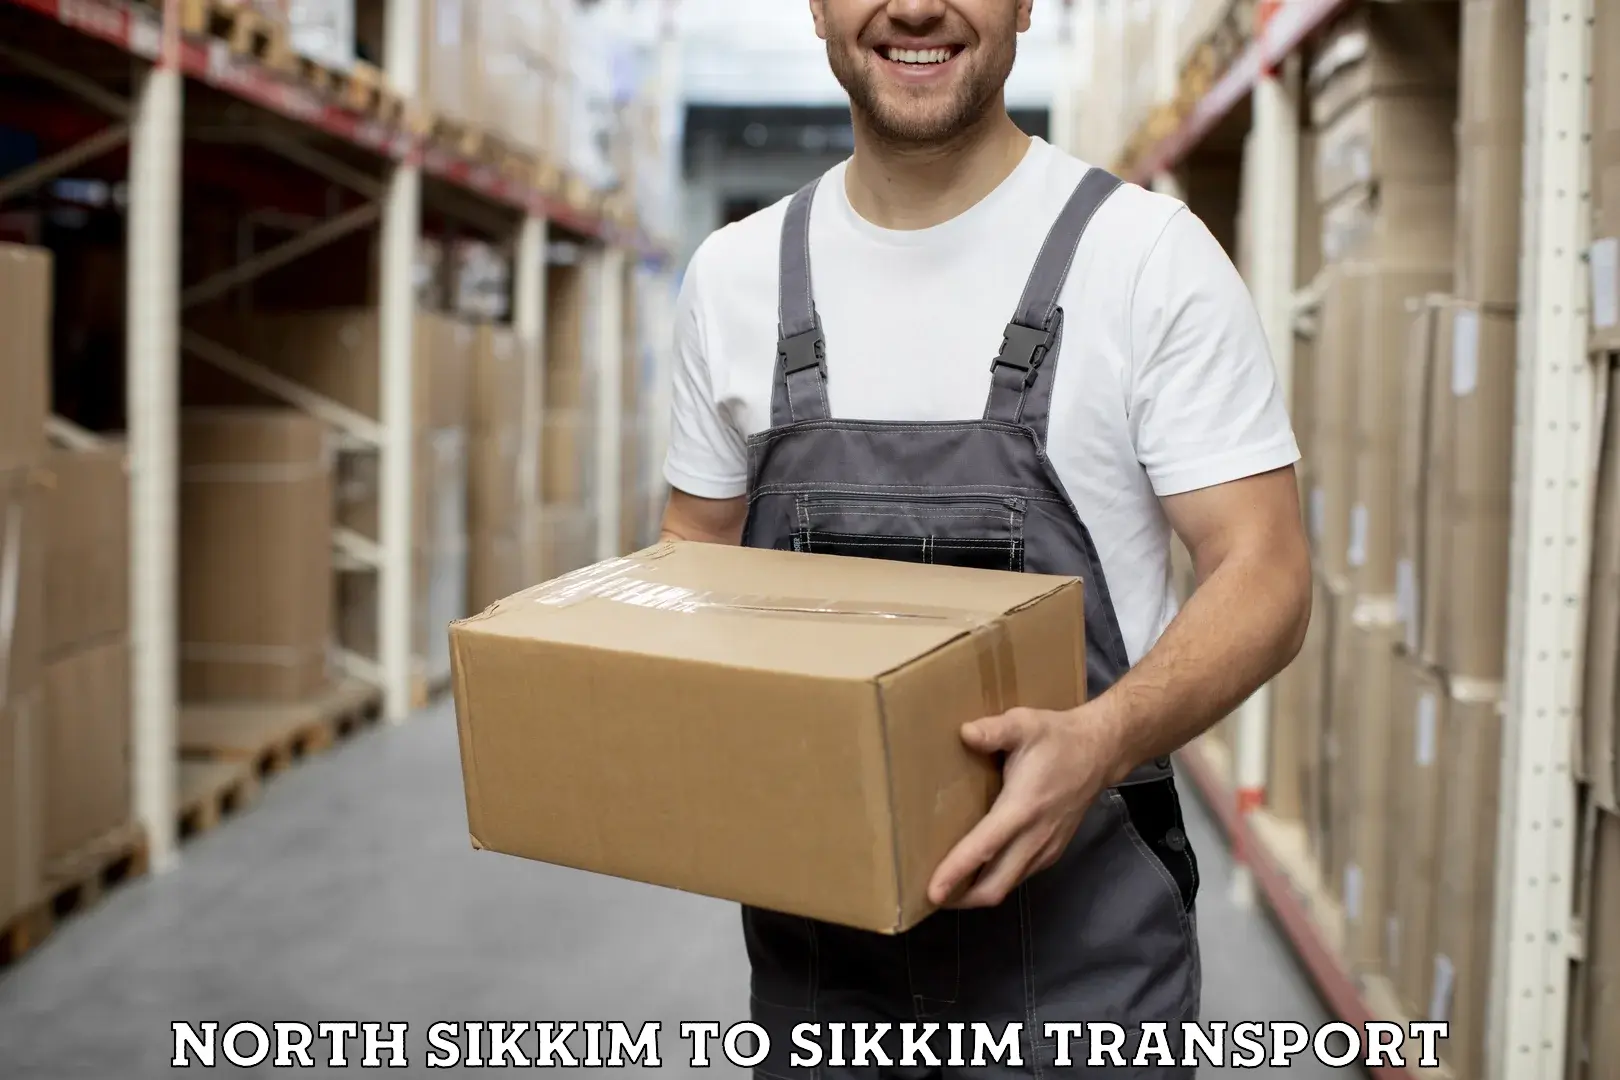 Daily transport service North Sikkim to Sikkim